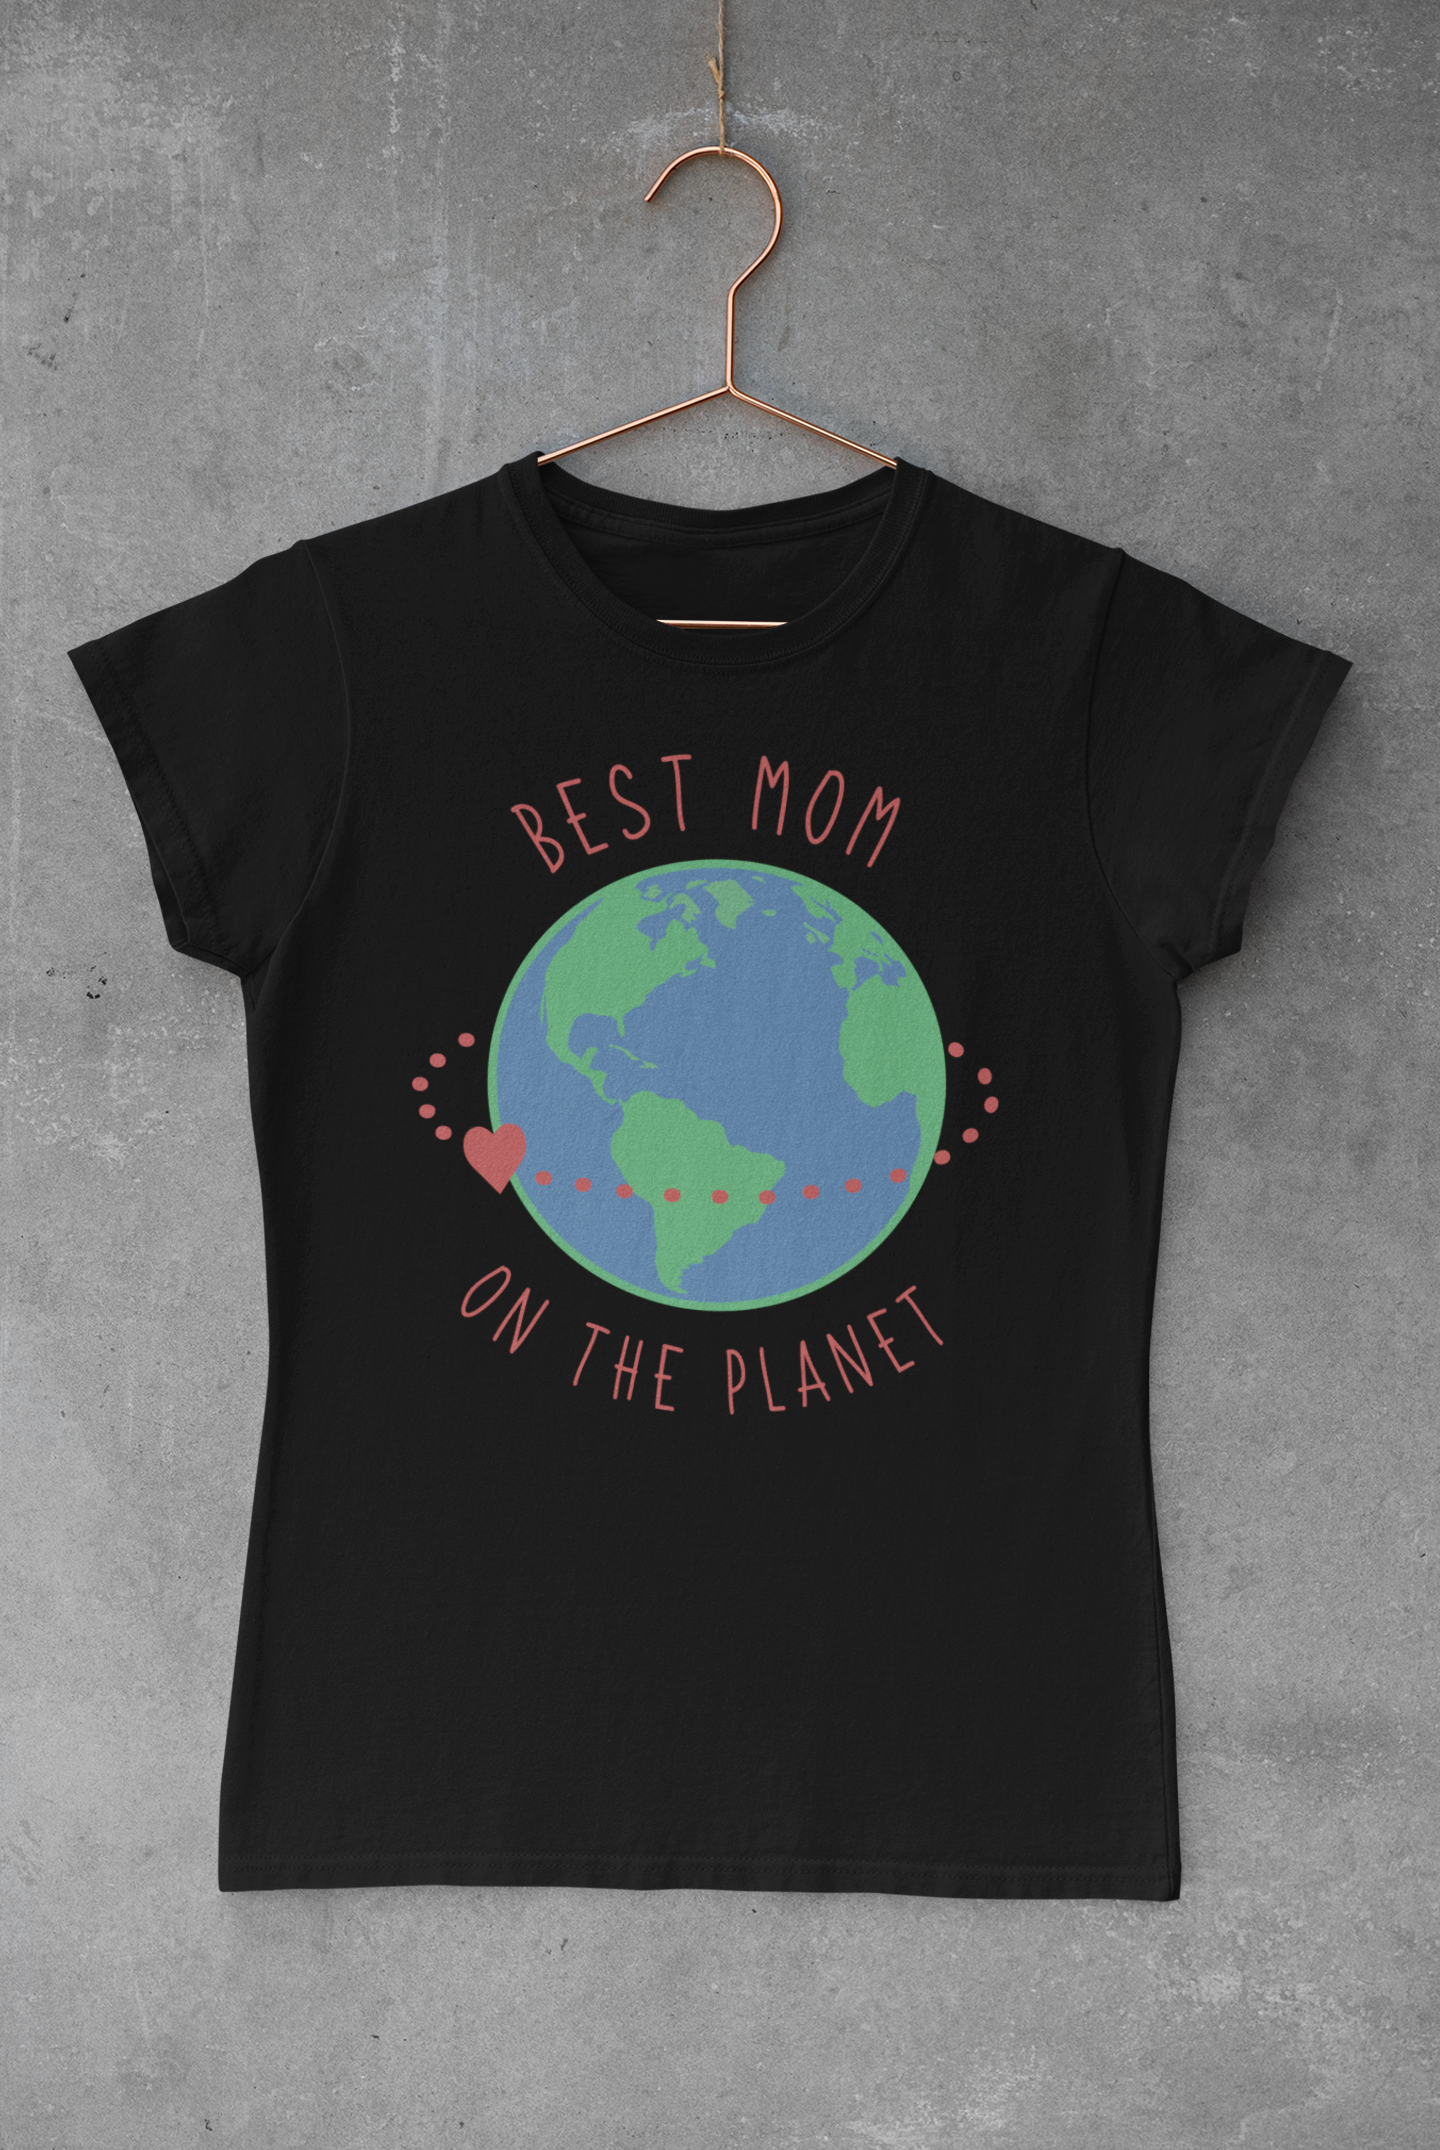 The Best Mom On The Planet T-shirt